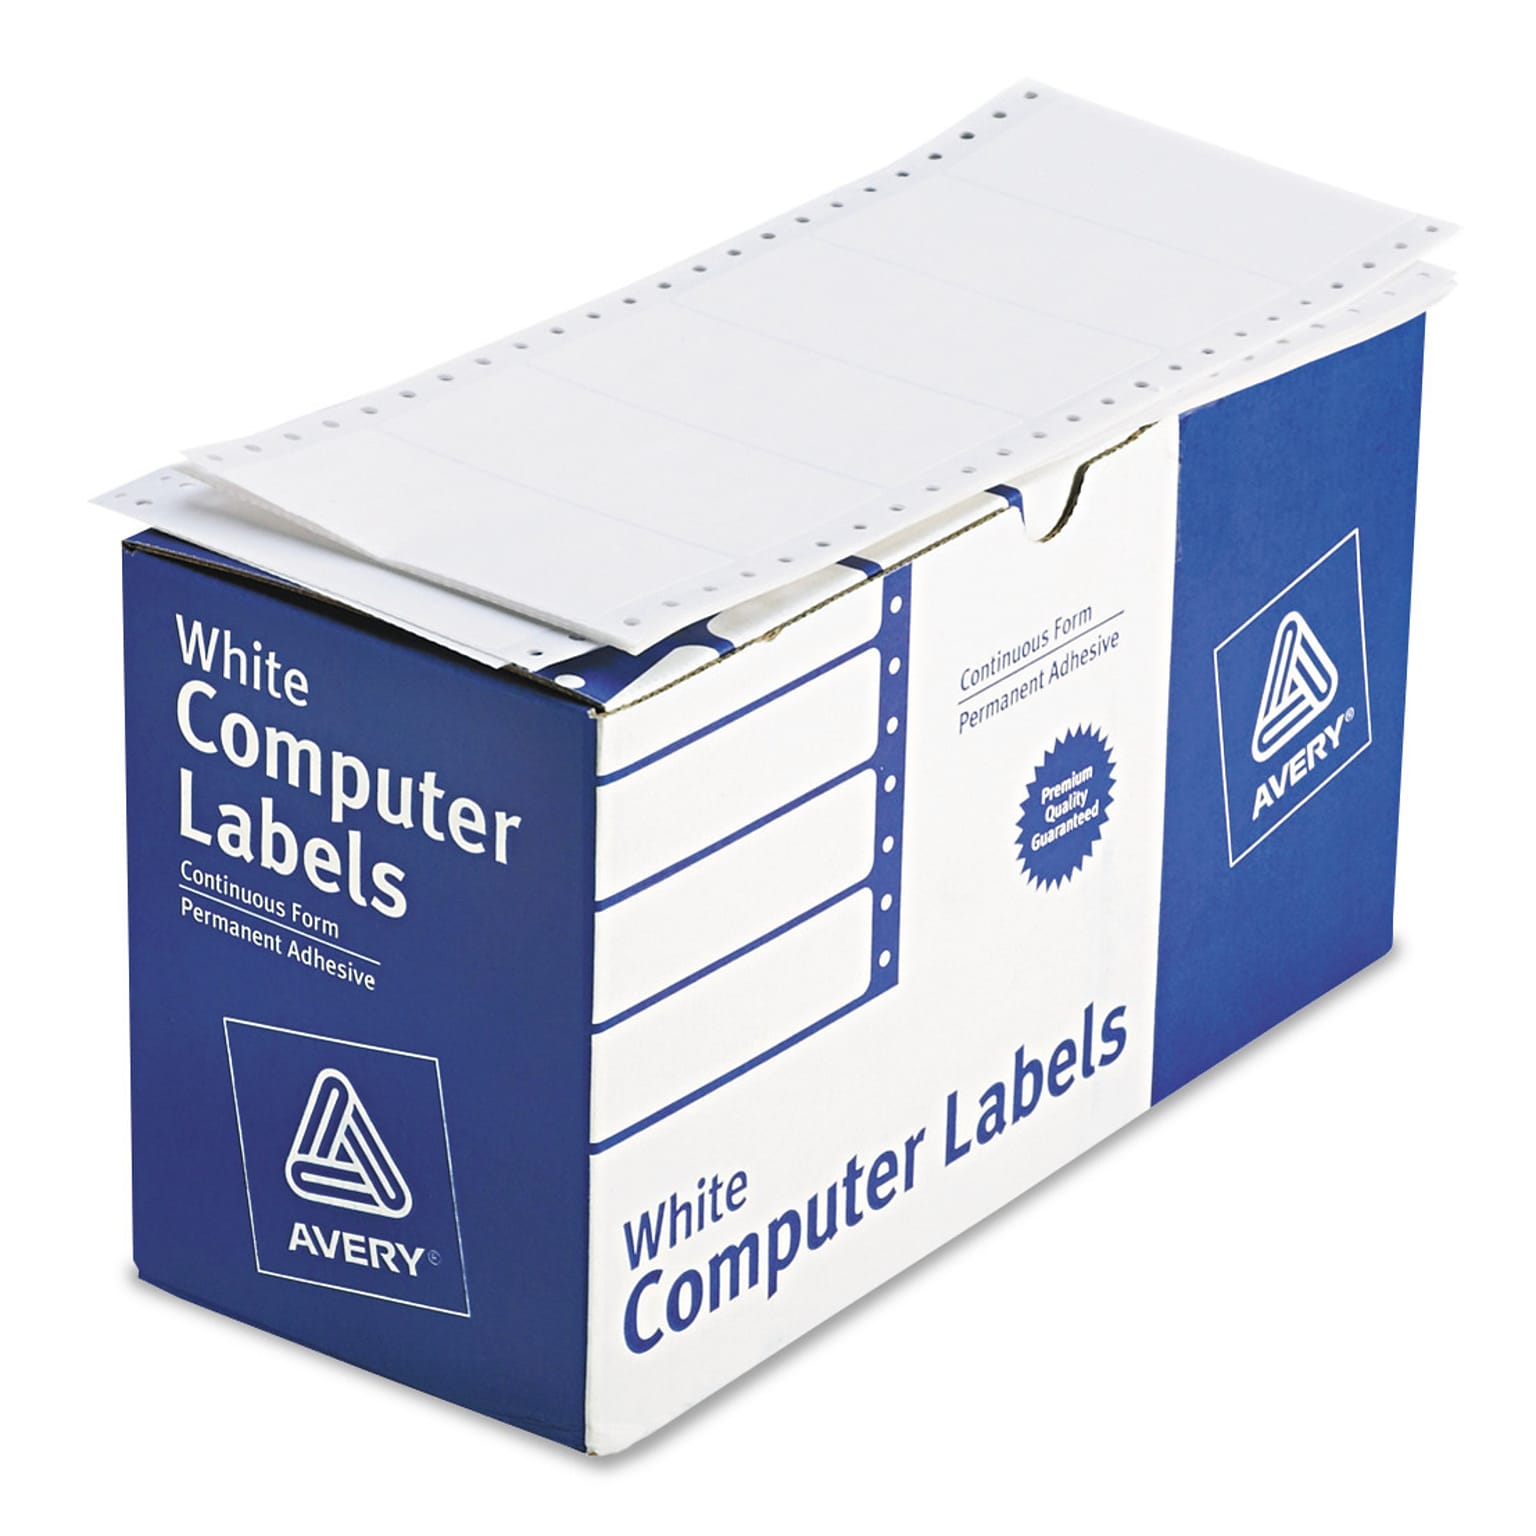 Avery Pin-Fed Continuous Form Computer Labels, 1 15/16 x 4, White, 1 Label Across, 5 Carrier, 5,000 Labels/Box (4022)